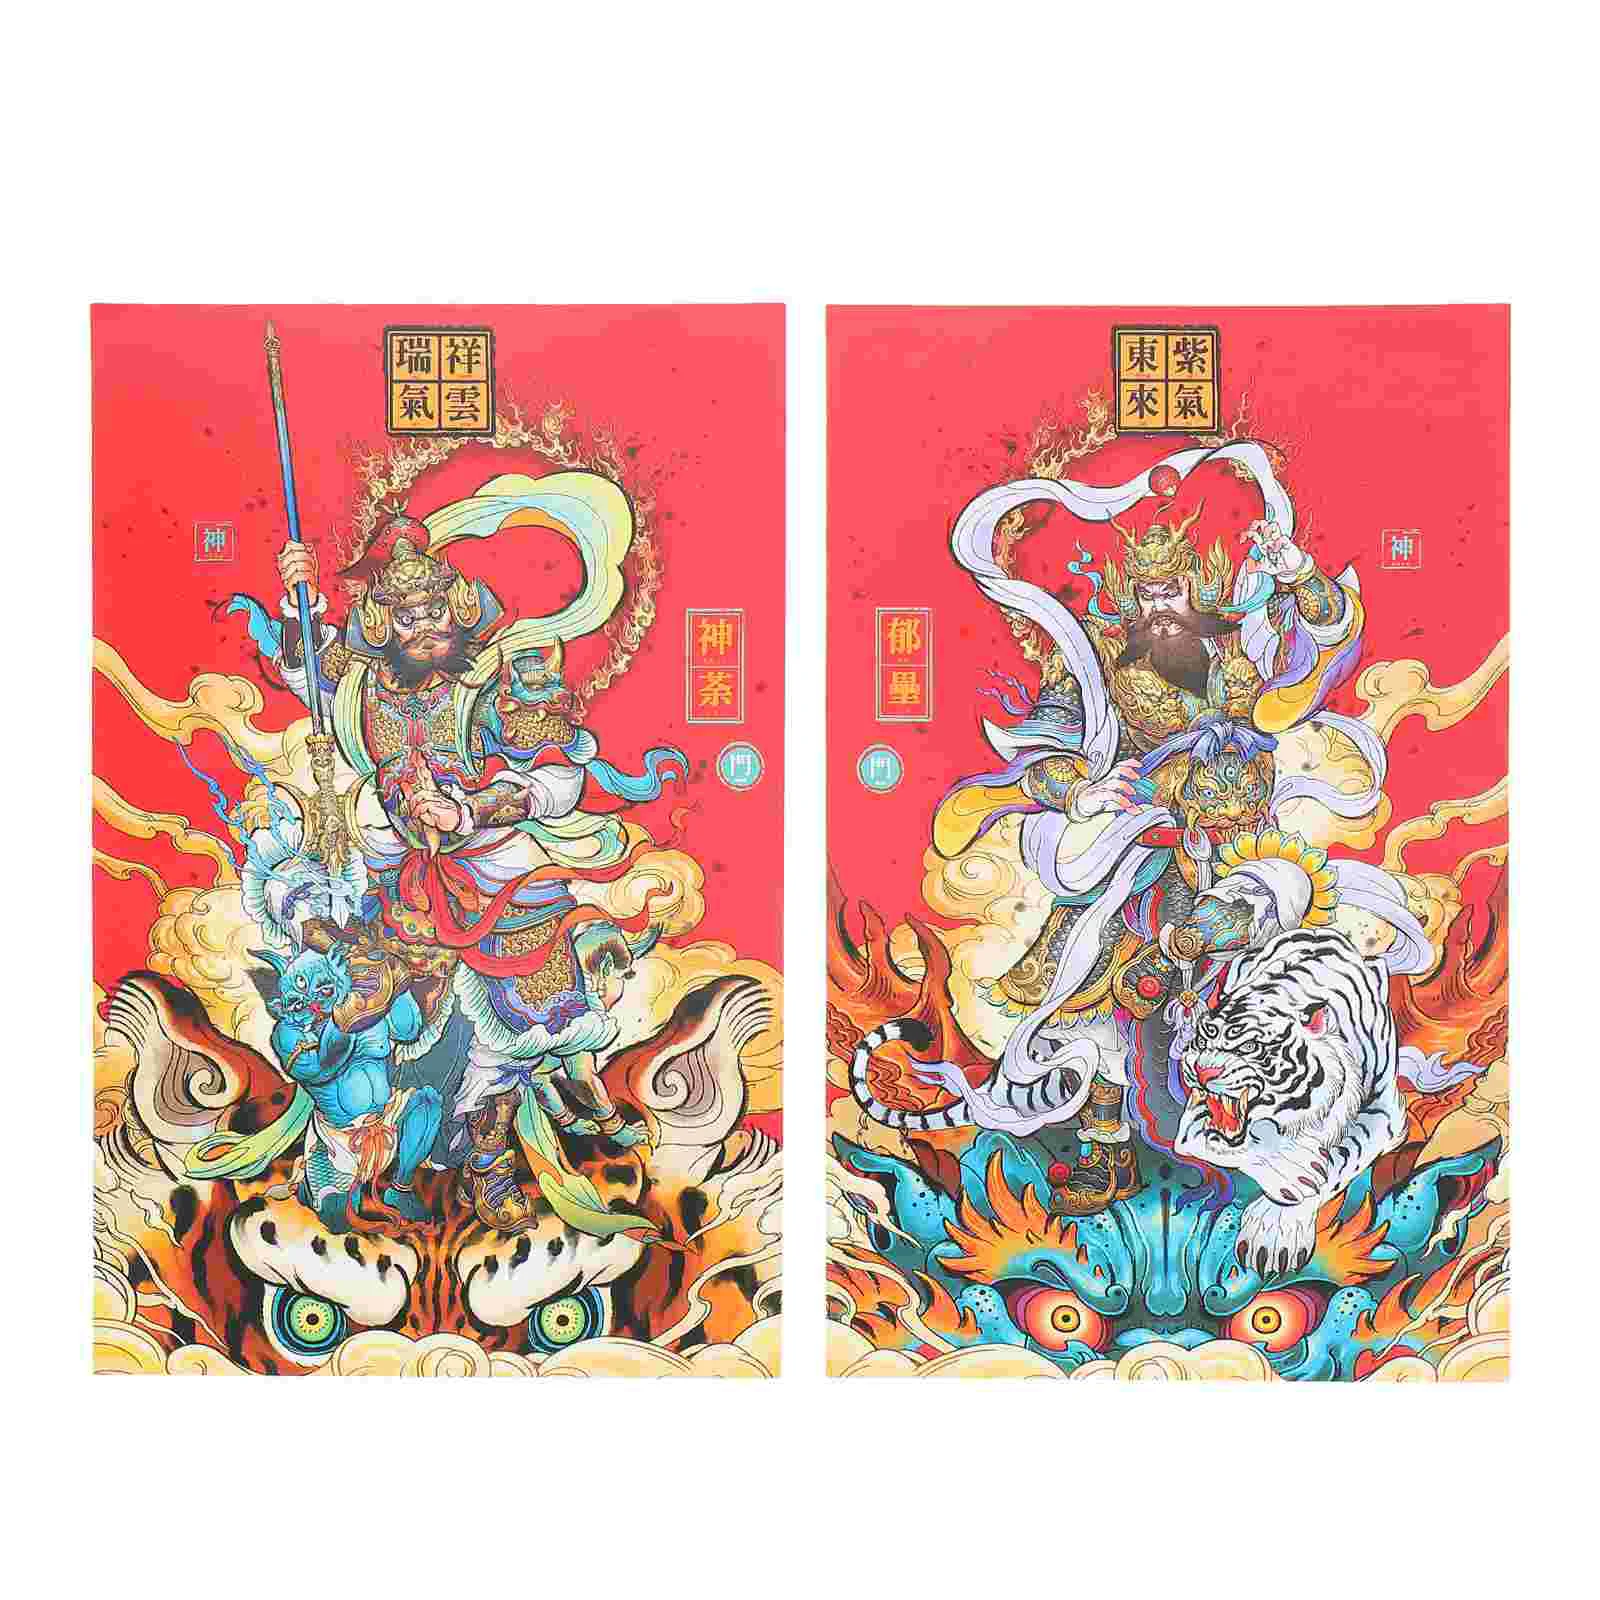 

New Year Chinese Door Decoration Godwealth Decor Window Cling Stickers Wall Decorations Lunar Supplies Party Eve Years Poster